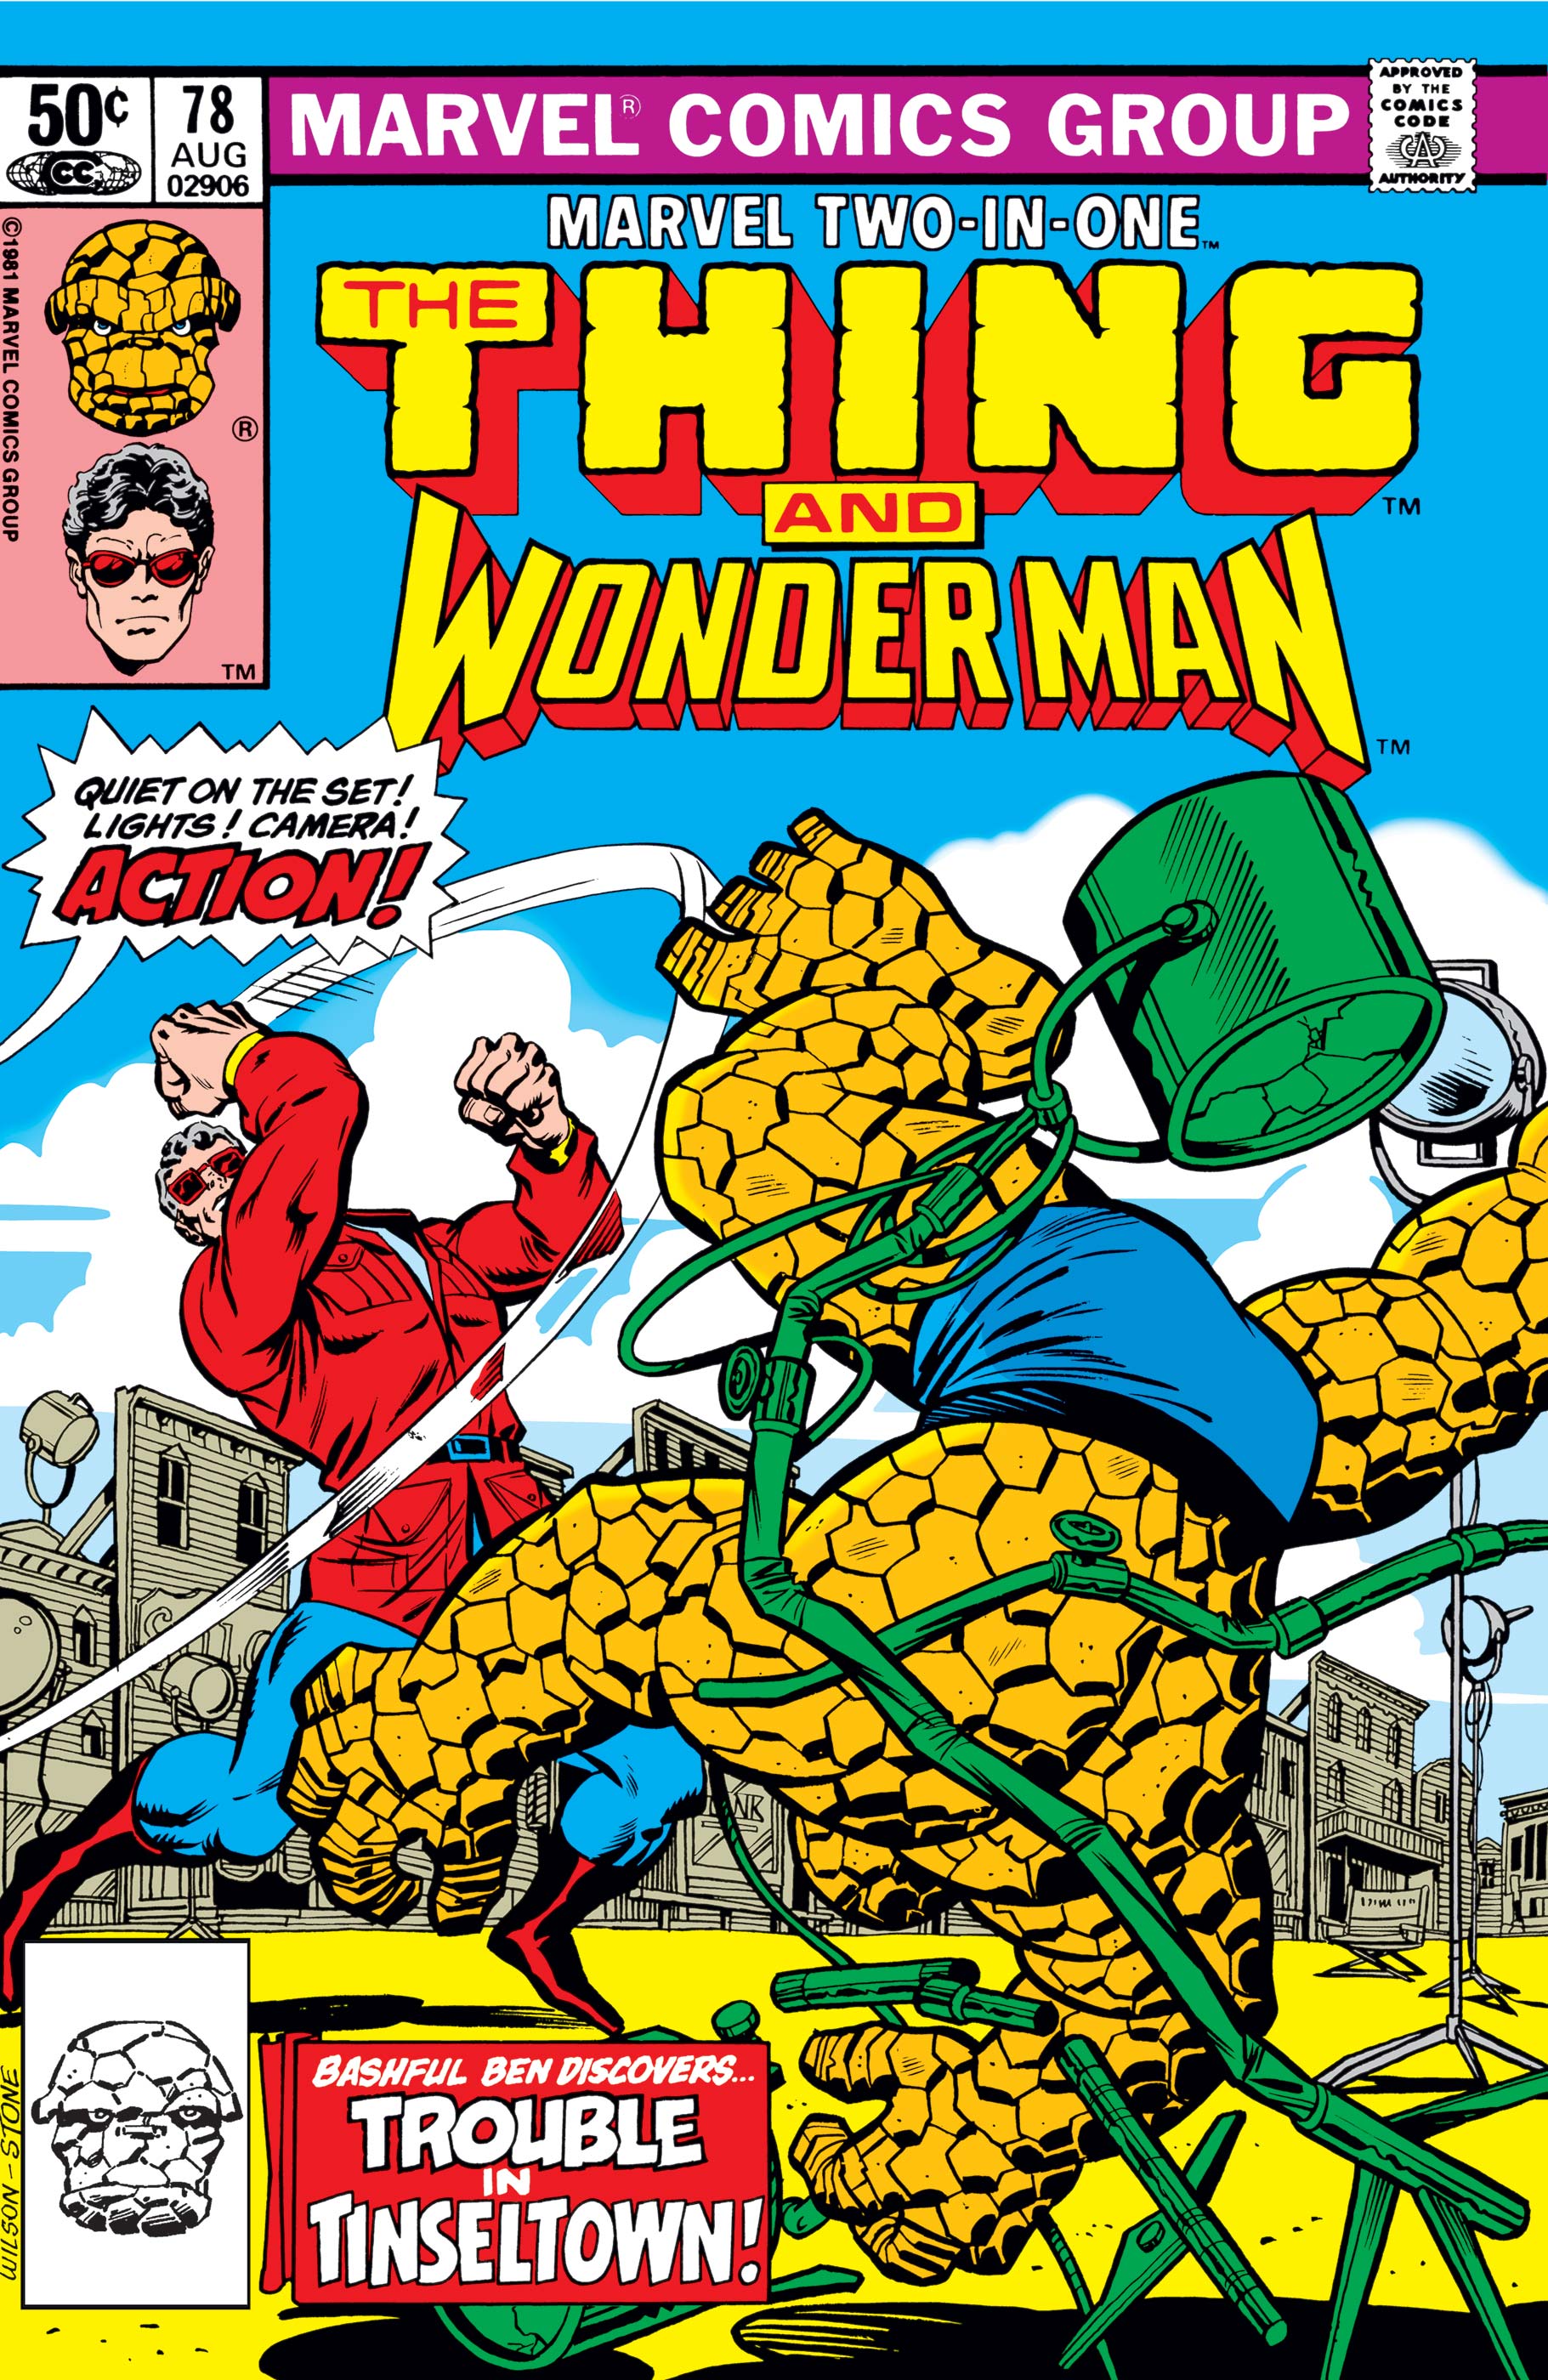 Marvel Two-in-One (1974) #78